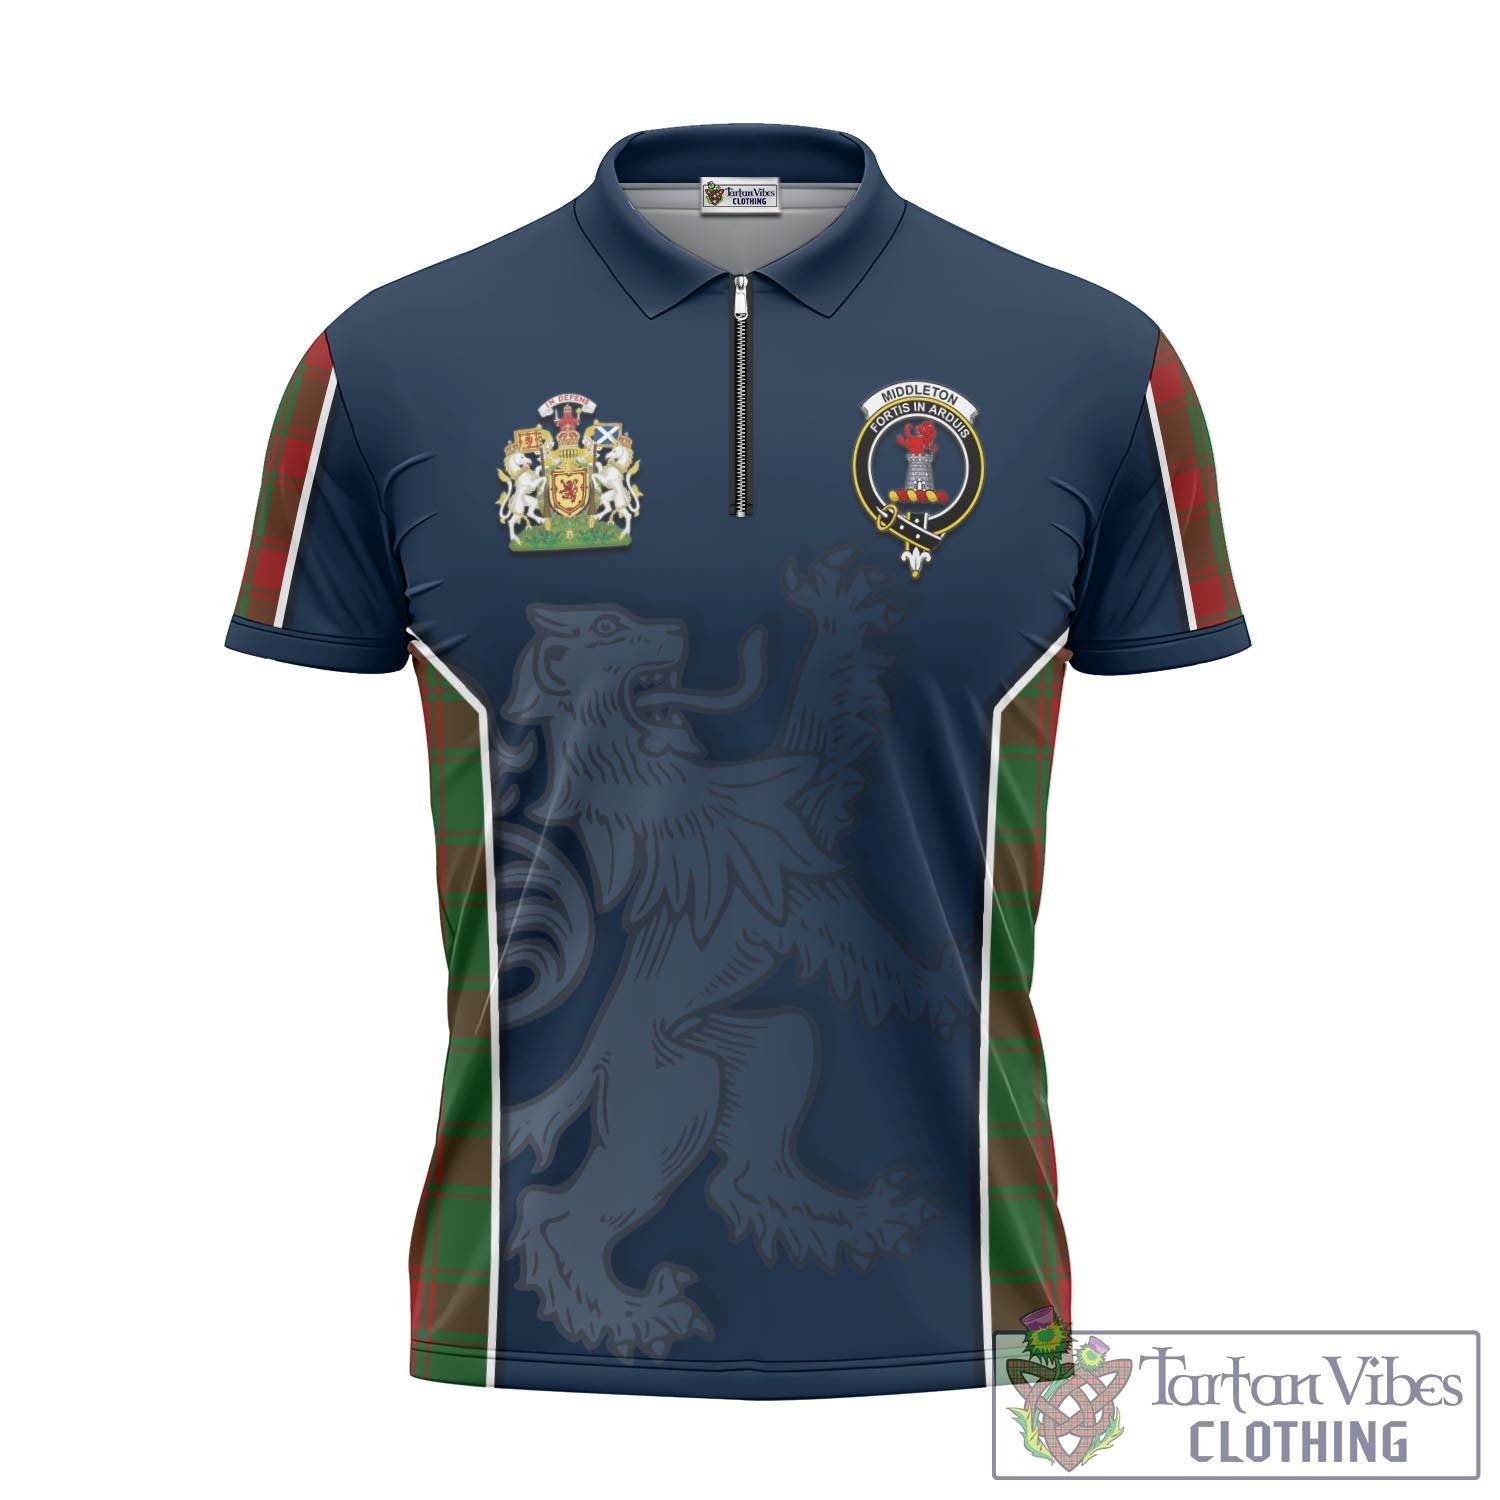 Tartan Vibes Clothing Middleton Tartan Zipper Polo Shirt with Family Crest and Lion Rampant Vibes Sport Style